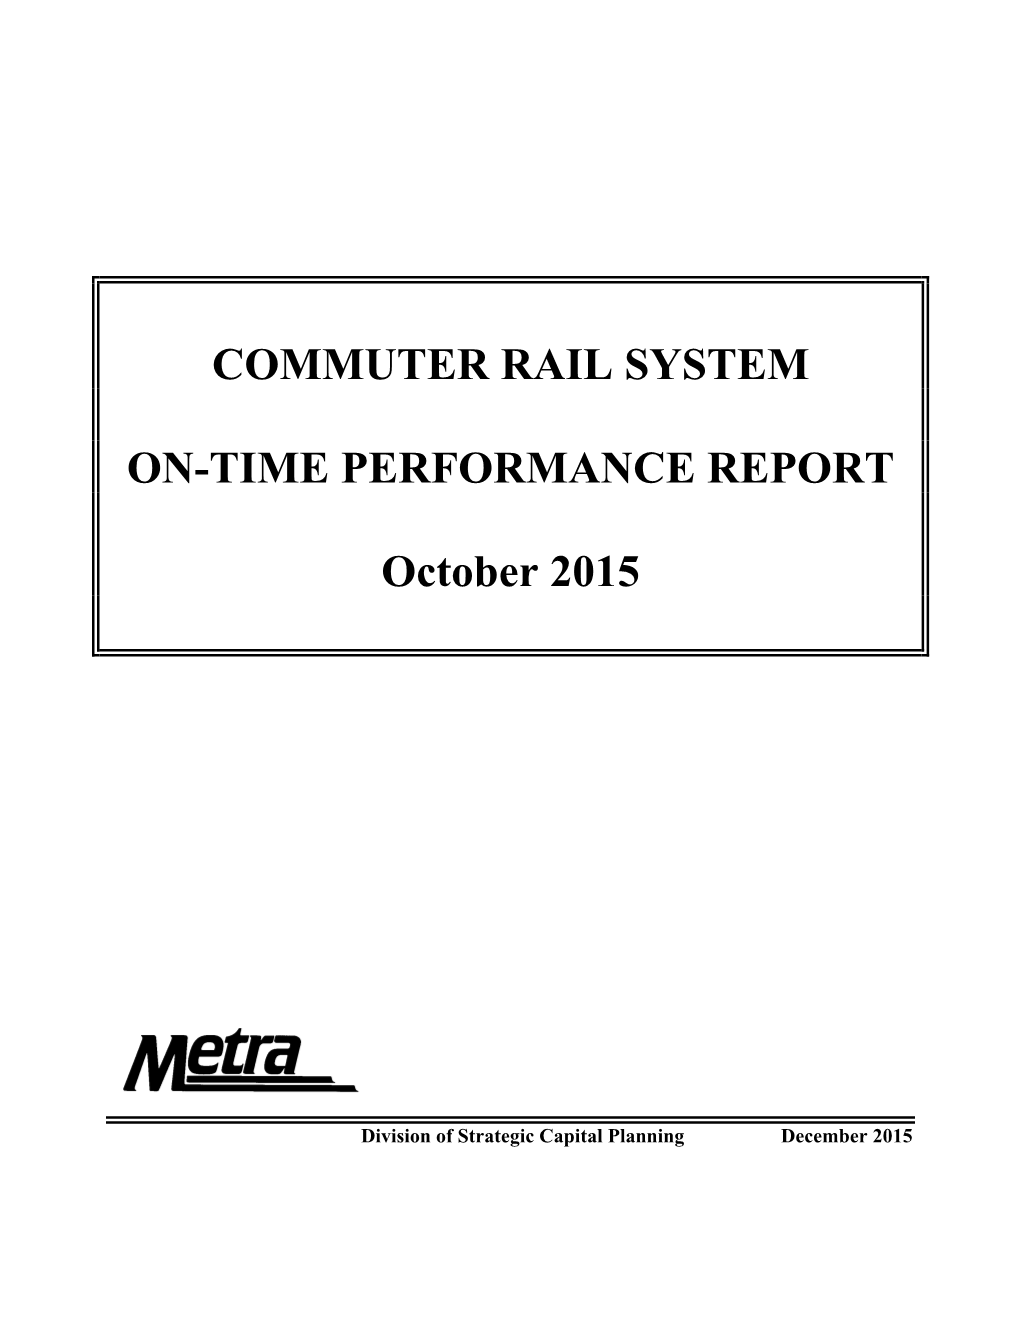 Commuter Rail System On-Time Performance Report